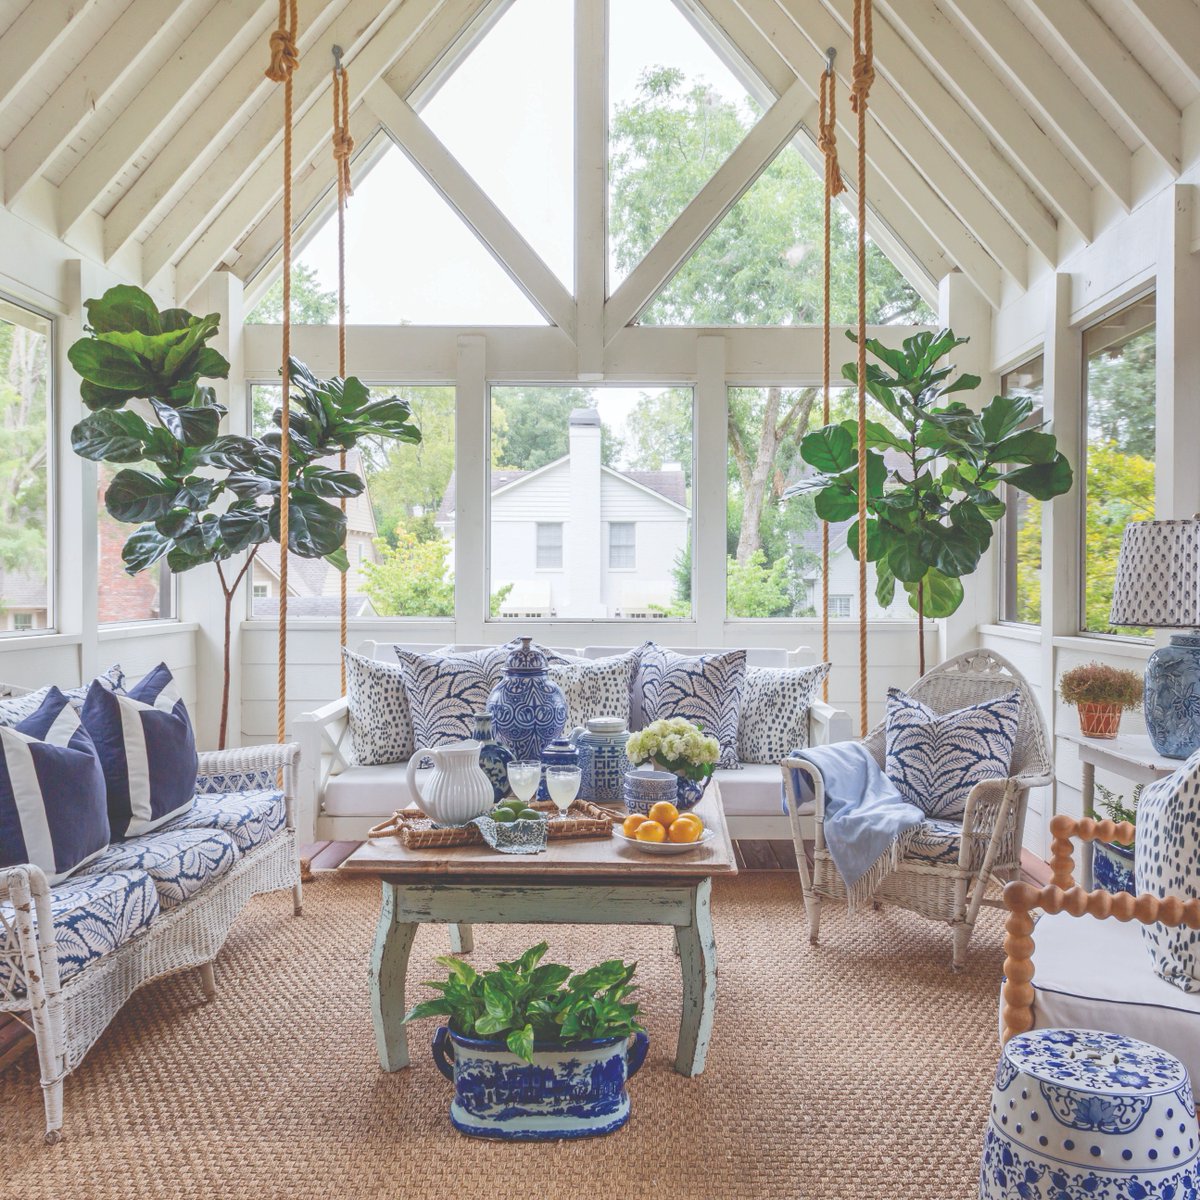 Isn’t this sunroom absolutely dreamy? 😍 Soaring ceilings and cozy furnishings are a match made in heaven, especially when accented with plenty of plants and classic blue-and-white flair.

#southernladymag #sunroom #porch #outdoorliving #blueandwhite #chinoiserie #grandmillennial